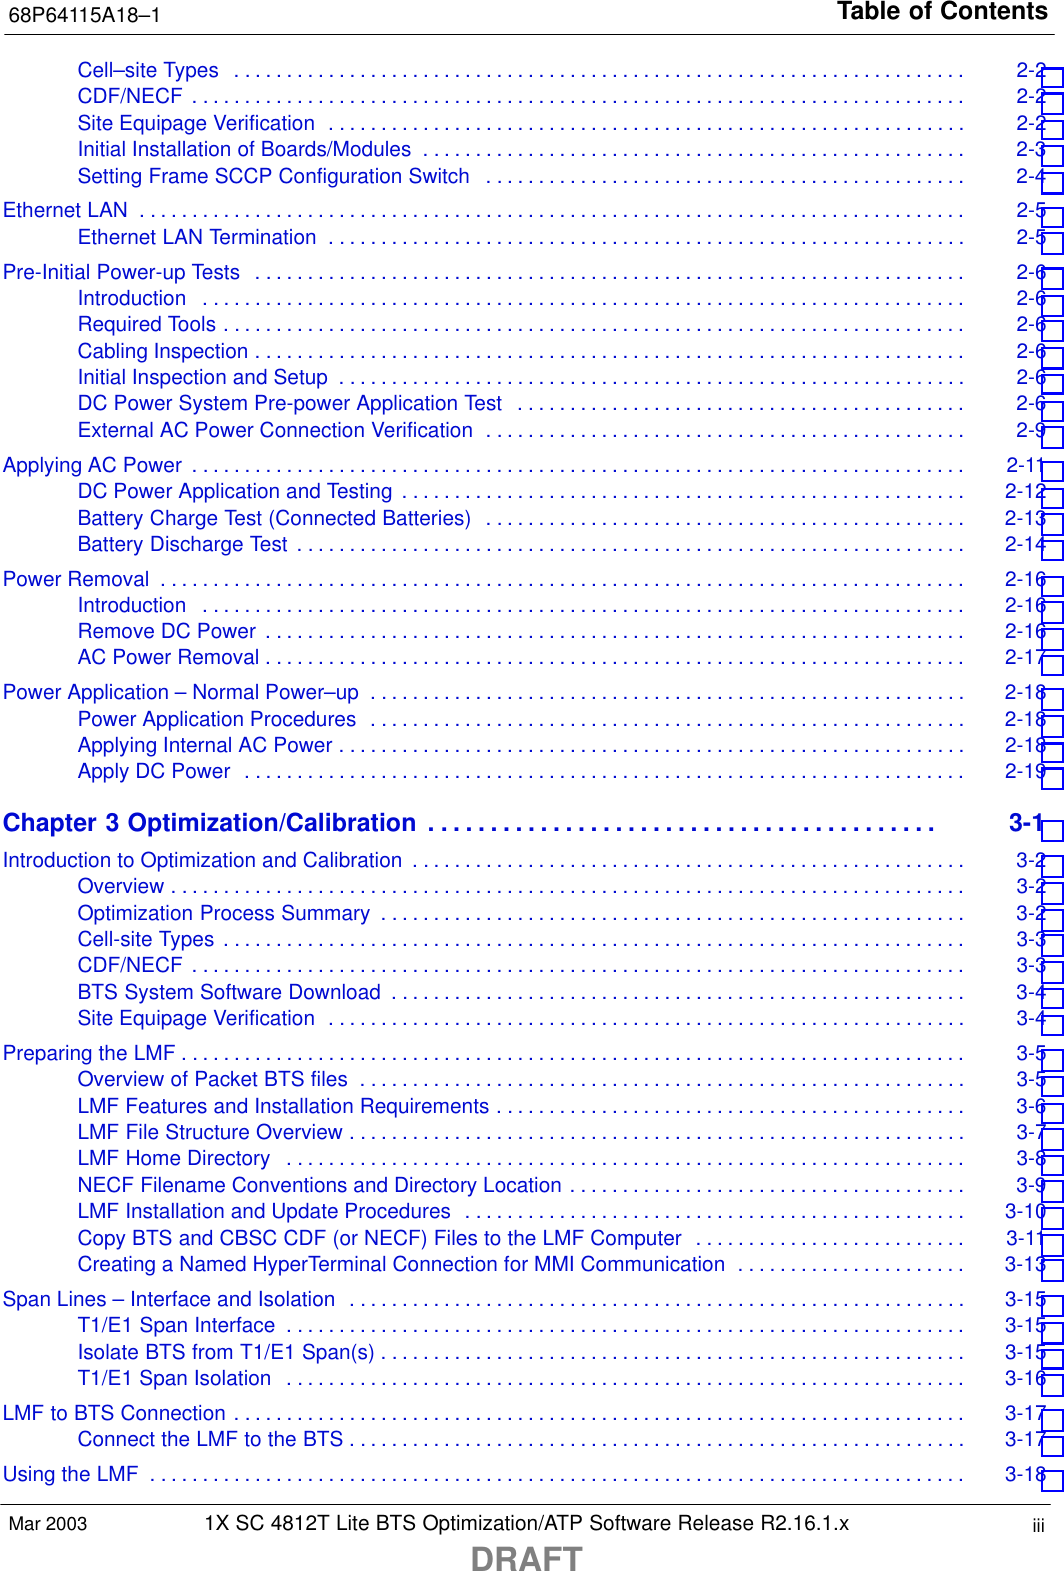 Table of Contents68P64115A18–11X SC 4812T Lite BTS Optimization/ATP Software Release R2.16.1.xDRAFTiiiMar 2003Cell–site Types 2-2 . . . . . . . . . . . . . . . . . . . . . . . . . . . . . . . . . . . . . . . . . . . . . . . . . . . . . . . . . . . . . . . . . . . . . . CDF/NECF 2-2 . . . . . . . . . . . . . . . . . . . . . . . . . . . . . . . . . . . . . . . . . . . . . . . . . . . . . . . . . . . . . . . . . . . . . . . . . . Site Equipage Verification 2-2 . . . . . . . . . . . . . . . . . . . . . . . . . . . . . . . . . . . . . . . . . . . . . . . . . . . . . . . . . . . . . Initial Installation of Boards/Modules 2-3 . . . . . . . . . . . . . . . . . . . . . . . . . . . . . . . . . . . . . . . . . . . . . . . . . . . . Setting Frame SCCP Configuration Switch 2-4 . . . . . . . . . . . . . . . . . . . . . . . . . . . . . . . . . . . . . . . . . . . . . . Ethernet LAN 2-5 . . . . . . . . . . . . . . . . . . . . . . . . . . . . . . . . . . . . . . . . . . . . . . . . . . . . . . . . . . . . . . . . . . . . . . . . . . . . . . . Ethernet LAN Termination 2-5 . . . . . . . . . . . . . . . . . . . . . . . . . . . . . . . . . . . . . . . . . . . . . . . . . . . . . . . . . . . . . Pre-Initial Power-up Tests 2-6 . . . . . . . . . . . . . . . . . . . . . . . . . . . . . . . . . . . . . . . . . . . . . . . . . . . . . . . . . . . . . . . . . . . . Introduction 2-6 . . . . . . . . . . . . . . . . . . . . . . . . . . . . . . . . . . . . . . . . . . . . . . . . . . . . . . . . . . . . . . . . . . . . . . . . . Required Tools 2-6 . . . . . . . . . . . . . . . . . . . . . . . . . . . . . . . . . . . . . . . . . . . . . . . . . . . . . . . . . . . . . . . . . . . . . . . Cabling Inspection 2-6 . . . . . . . . . . . . . . . . . . . . . . . . . . . . . . . . . . . . . . . . . . . . . . . . . . . . . . . . . . . . . . . . . . . . Initial Inspection and Setup 2-6 . . . . . . . . . . . . . . . . . . . . . . . . . . . . . . . . . . . . . . . . . . . . . . . . . . . . . . . . . . . . DC Power System Pre-power Application Test 2-6 . . . . . . . . . . . . . . . . . . . . . . . . . . . . . . . . . . . . . . . . . . . External AC Power Connection Verification 2-9 . . . . . . . . . . . . . . . . . . . . . . . . . . . . . . . . . . . . . . . . . . . . . . Applying AC Power 2-11 . . . . . . . . . . . . . . . . . . . . . . . . . . . . . . . . . . . . . . . . . . . . . . . . . . . . . . . . . . . . . . . . . . . . . . . . . . DC Power Application and Testing 2-12 . . . . . . . . . . . . . . . . . . . . . . . . . . . . . . . . . . . . . . . . . . . . . . . . . . . . . . Battery Charge Test (Connected Batteries) 2-13 . . . . . . . . . . . . . . . . . . . . . . . . . . . . . . . . . . . . . . . . . . . . . . Battery Discharge Test 2-14 . . . . . . . . . . . . . . . . . . . . . . . . . . . . . . . . . . . . . . . . . . . . . . . . . . . . . . . . . . . . . . . . Power Removal 2-16 . . . . . . . . . . . . . . . . . . . . . . . . . . . . . . . . . . . . . . . . . . . . . . . . . . . . . . . . . . . . . . . . . . . . . . . . . . . . . Introduction 2-16 . . . . . . . . . . . . . . . . . . . . . . . . . . . . . . . . . . . . . . . . . . . . . . . . . . . . . . . . . . . . . . . . . . . . . . . . . Remove DC Power 2-16 . . . . . . . . . . . . . . . . . . . . . . . . . . . . . . . . . . . . . . . . . . . . . . . . . . . . . . . . . . . . . . . . . . . AC Power Removal 2-17 . . . . . . . . . . . . . . . . . . . . . . . . . . . . . . . . . . . . . . . . . . . . . . . . . . . . . . . . . . . . . . . . . . . Power Application – Normal Power–up 2-18 . . . . . . . . . . . . . . . . . . . . . . . . . . . . . . . . . . . . . . . . . . . . . . . . . . . . . . . . . Power Application Procedures 2-18 . . . . . . . . . . . . . . . . . . . . . . . . . . . . . . . . . . . . . . . . . . . . . . . . . . . . . . . . . Applying Internal AC Power 2-18 . . . . . . . . . . . . . . . . . . . . . . . . . . . . . . . . . . . . . . . . . . . . . . . . . . . . . . . . . . . . Apply DC Power 2-19 . . . . . . . . . . . . . . . . . . . . . . . . . . . . . . . . . . . . . . . . . . . . . . . . . . . . . . . . . . . . . . . . . . . . . Chapter 3 Optimization/Calibration 3-1 . . . . . . . . . . . . . . . . . . . . . . . . . . . . . . . . . . . . . . . . . Introduction to Optimization and Calibration 3-2 . . . . . . . . . . . . . . . . . . . . . . . . . . . . . . . . . . . . . . . . . . . . . . . . . . . . . Overview 3-2 . . . . . . . . . . . . . . . . . . . . . . . . . . . . . . . . . . . . . . . . . . . . . . . . . . . . . . . . . . . . . . . . . . . . . . . . . . . . Optimization Process Summary 3-2 . . . . . . . . . . . . . . . . . . . . . . . . . . . . . . . . . . . . . . . . . . . . . . . . . . . . . . . . Cell-site Types 3-3 . . . . . . . . . . . . . . . . . . . . . . . . . . . . . . . . . . . . . . . . . . . . . . . . . . . . . . . . . . . . . . . . . . . . . . . CDF/NECF 3-3 . . . . . . . . . . . . . . . . . . . . . . . . . . . . . . . . . . . . . . . . . . . . . . . . . . . . . . . . . . . . . . . . . . . . . . . . . . BTS System Software Download 3-4 . . . . . . . . . . . . . . . . . . . . . . . . . . . . . . . . . . . . . . . . . . . . . . . . . . . . . . . Site Equipage Verification 3-4 . . . . . . . . . . . . . . . . . . . . . . . . . . . . . . . . . . . . . . . . . . . . . . . . . . . . . . . . . . . . . Preparing the LMF 3-5 . . . . . . . . . . . . . . . . . . . . . . . . . . . . . . . . . . . . . . . . . . . . . . . . . . . . . . . . . . . . . . . . . . . . . . . . . . . Overview of Packet BTS files 3-5 . . . . . . . . . . . . . . . . . . . . . . . . . . . . . . . . . . . . . . . . . . . . . . . . . . . . . . . . . . LMF Features and Installation Requirements 3-6 . . . . . . . . . . . . . . . . . . . . . . . . . . . . . . . . . . . . . . . . . . . . . LMF File Structure Overview 3-7 . . . . . . . . . . . . . . . . . . . . . . . . . . . . . . . . . . . . . . . . . . . . . . . . . . . . . . . . . . . LMF Home Directory 3-8 . . . . . . . . . . . . . . . . . . . . . . . . . . . . . . . . . . . . . . . . . . . . . . . . . . . . . . . . . . . . . . . . . NECF Filename Conventions and Directory Location 3-9 . . . . . . . . . . . . . . . . . . . . . . . . . . . . . . . . . . . . . . LMF Installation and Update Procedures 3-10 . . . . . . . . . . . . . . . . . . . . . . . . . . . . . . . . . . . . . . . . . . . . . . . . Copy BTS and CBSC CDF (or NECF) Files to the LMF Computer 3-11 . . . . . . . . . . . . . . . . . . . . . . . . . . Creating a Named HyperTerminal Connection for MMI Communication 3-13 . . . . . . . . . . . . . . . . . . . . . . Span Lines – Interface and Isolation 3-15 . . . . . . . . . . . . . . . . . . . . . . . . . . . . . . . . . . . . . . . . . . . . . . . . . . . . . . . . . . . T1/E1 Span Interface 3-15 . . . . . . . . . . . . . . . . . . . . . . . . . . . . . . . . . . . . . . . . . . . . . . . . . . . . . . . . . . . . . . . . . Isolate BTS from T1/E1 Span(s) 3-15 . . . . . . . . . . . . . . . . . . . . . . . . . . . . . . . . . . . . . . . . . . . . . . . . . . . . . . . . T1/E1 Span Isolation 3-16 . . . . . . . . . . . . . . . . . . . . . . . . . . . . . . . . . . . . . . . . . . . . . . . . . . . . . . . . . . . . . . . . . LMF to BTS Connection 3-17 . . . . . . . . . . . . . . . . . . . . . . . . . . . . . . . . . . . . . . . . . . . . . . . . . . . . . . . . . . . . . . . . . . . . . . Connect the LMF to the BTS 3-17 . . . . . . . . . . . . . . . . . . . . . . . . . . . . . . . . . . . . . . . . . . . . . . . . . . . . . . . . . . . Using the LMF 3-18 . . . . . . . . . . . . . . . . . . . . . . . . . . . . . . . . . . . . . . . . . . . . . . . . . . . . . . . . . . . . . . . . . . . . . . . . . . . . . . 